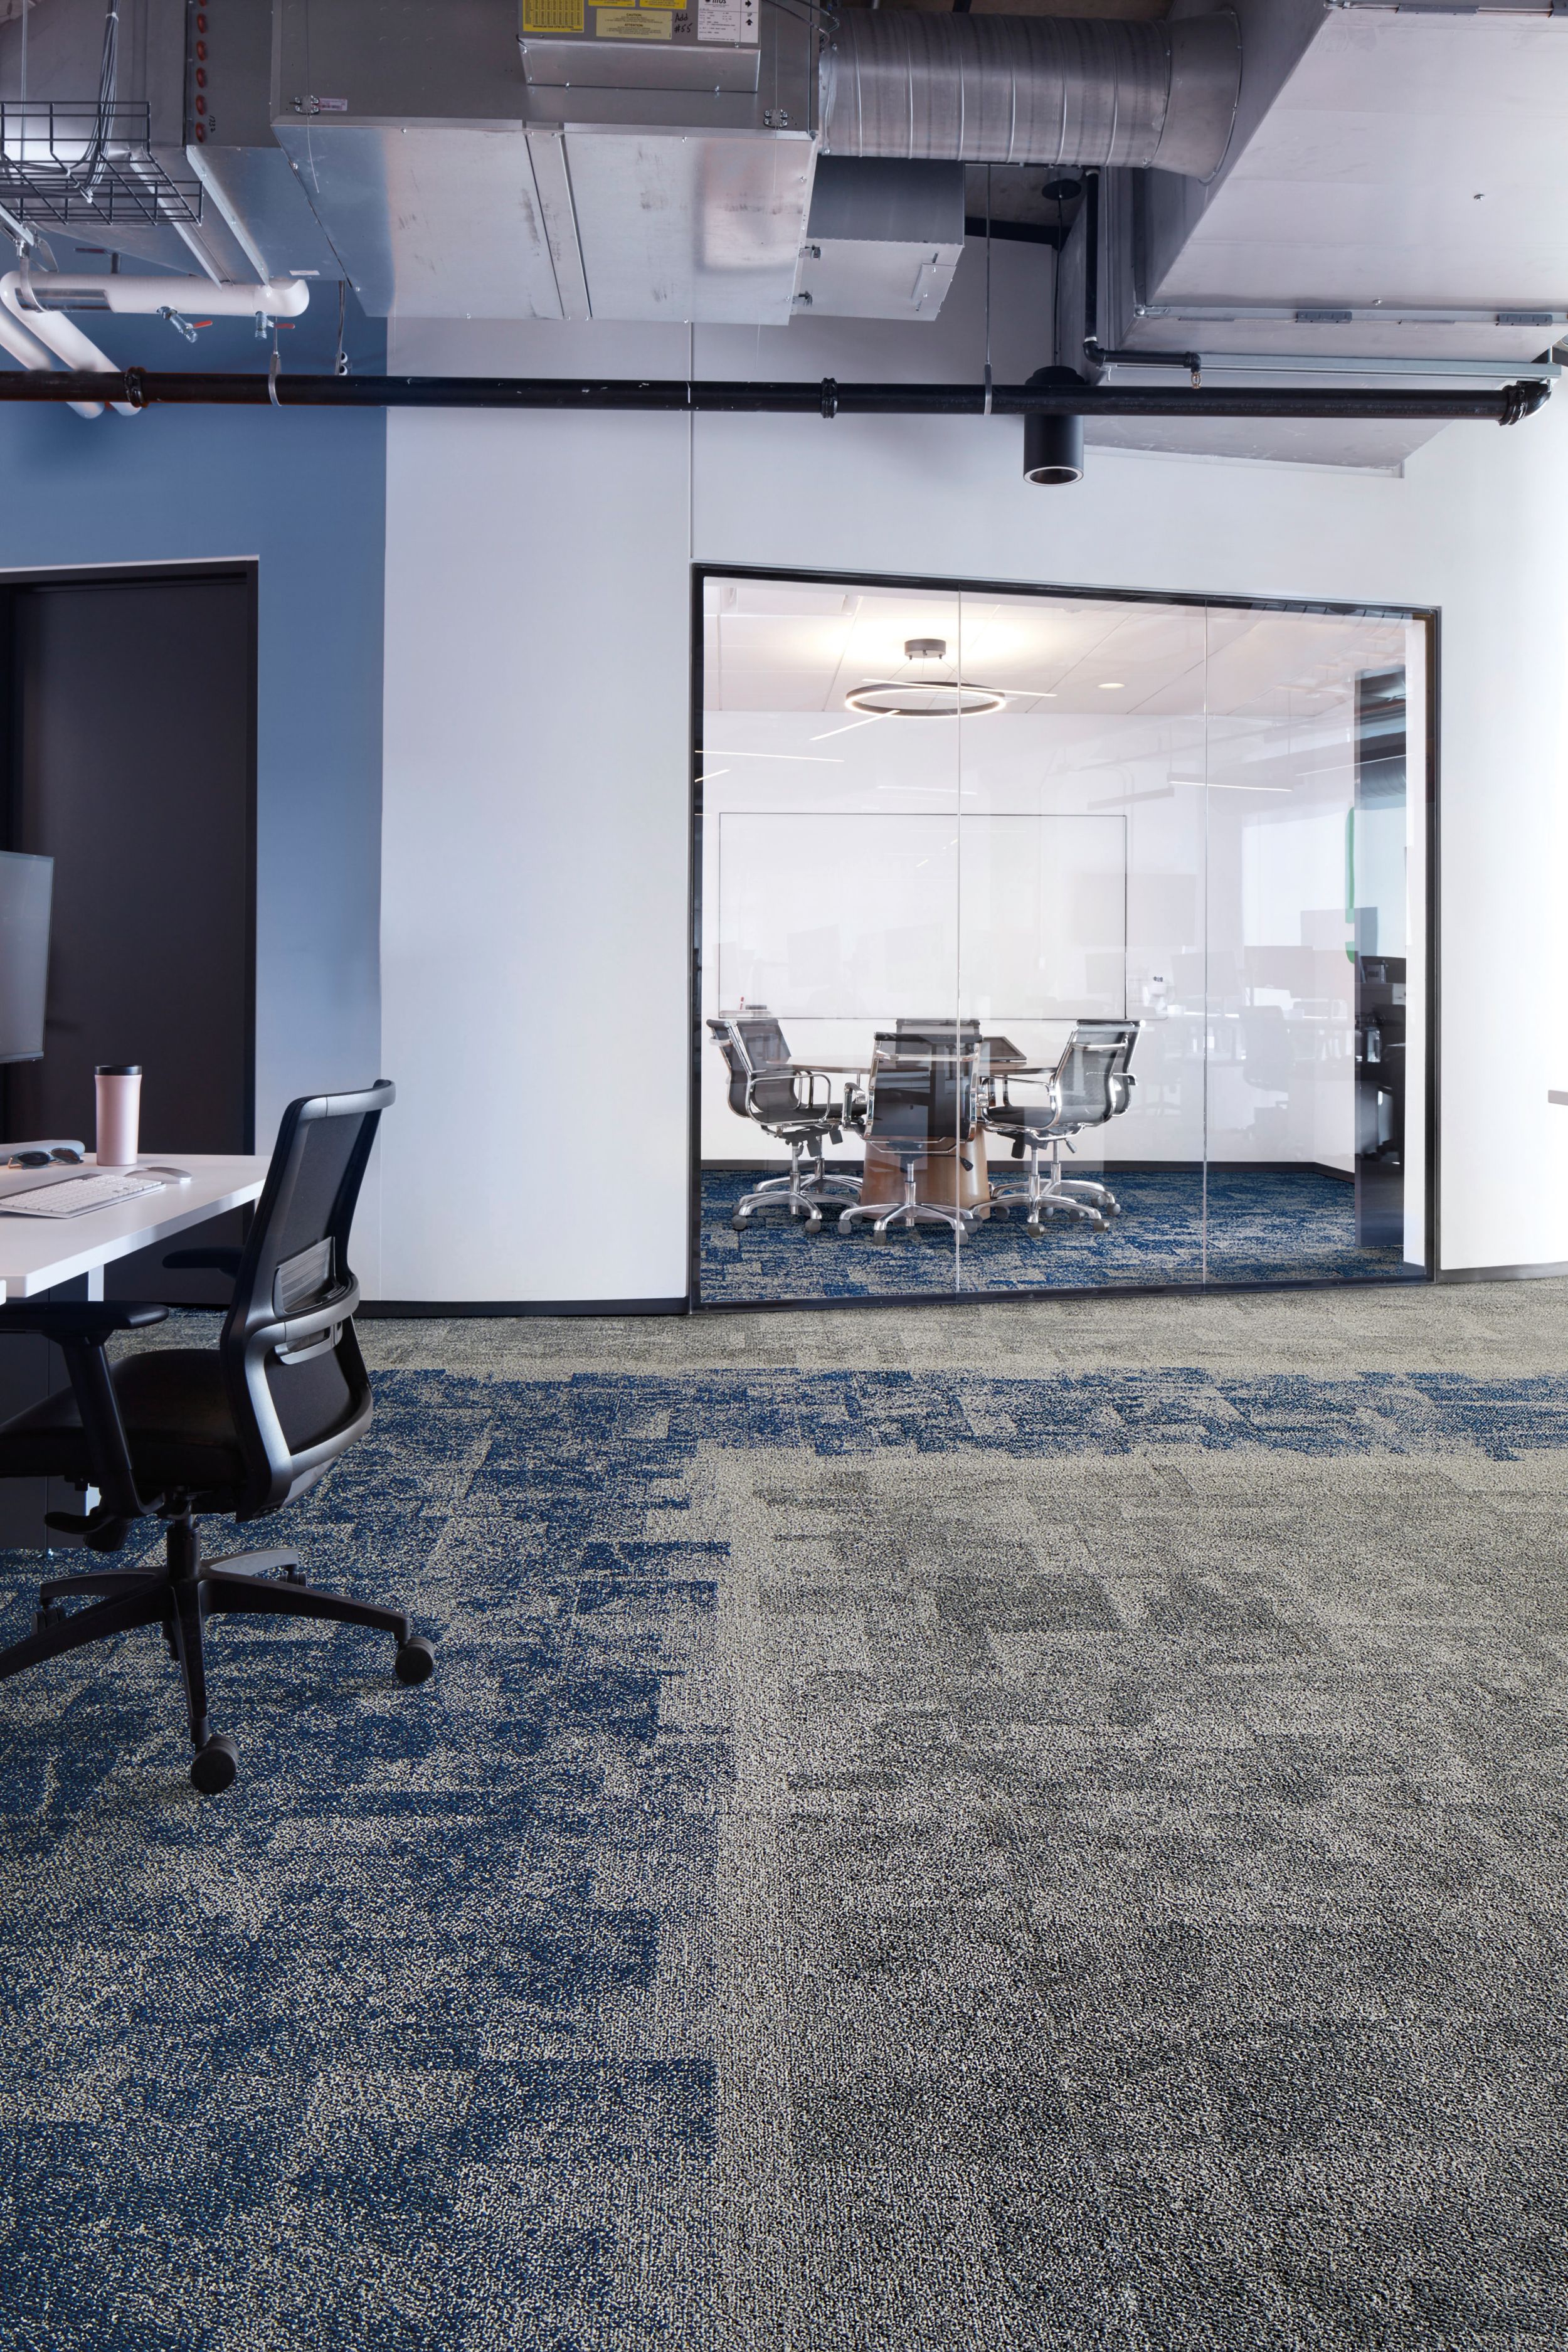 Interface Open Air 404 carpet tile with meeting room in background with glass wall Bildnummer 4